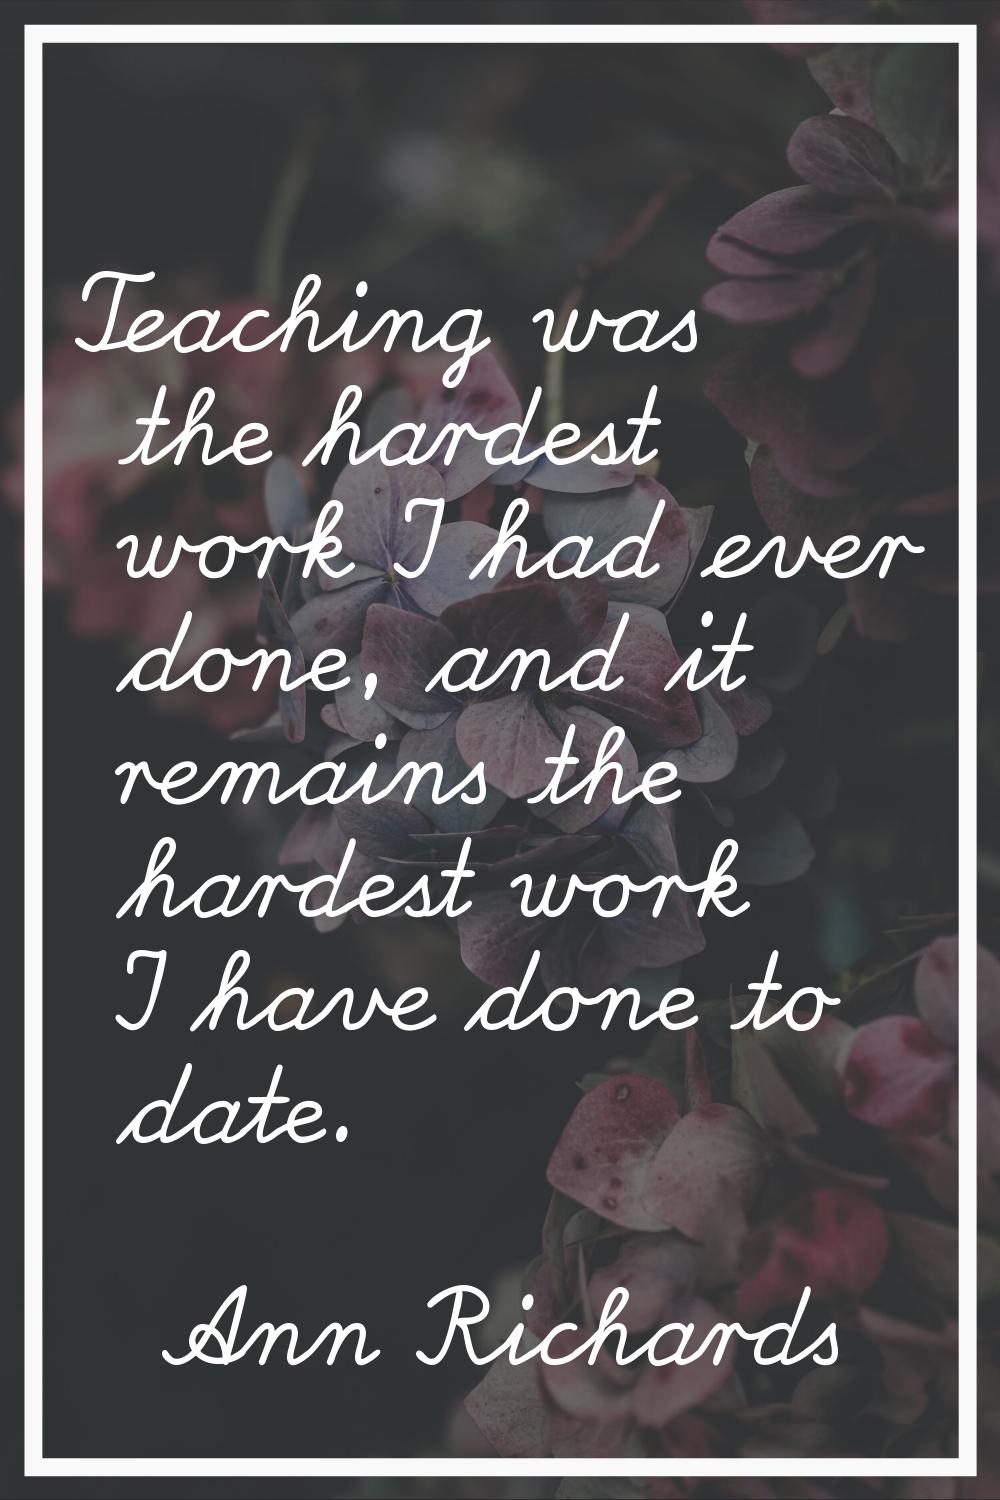 Teaching was the hardest work I had ever done, and it remains the hardest work I have done to date.